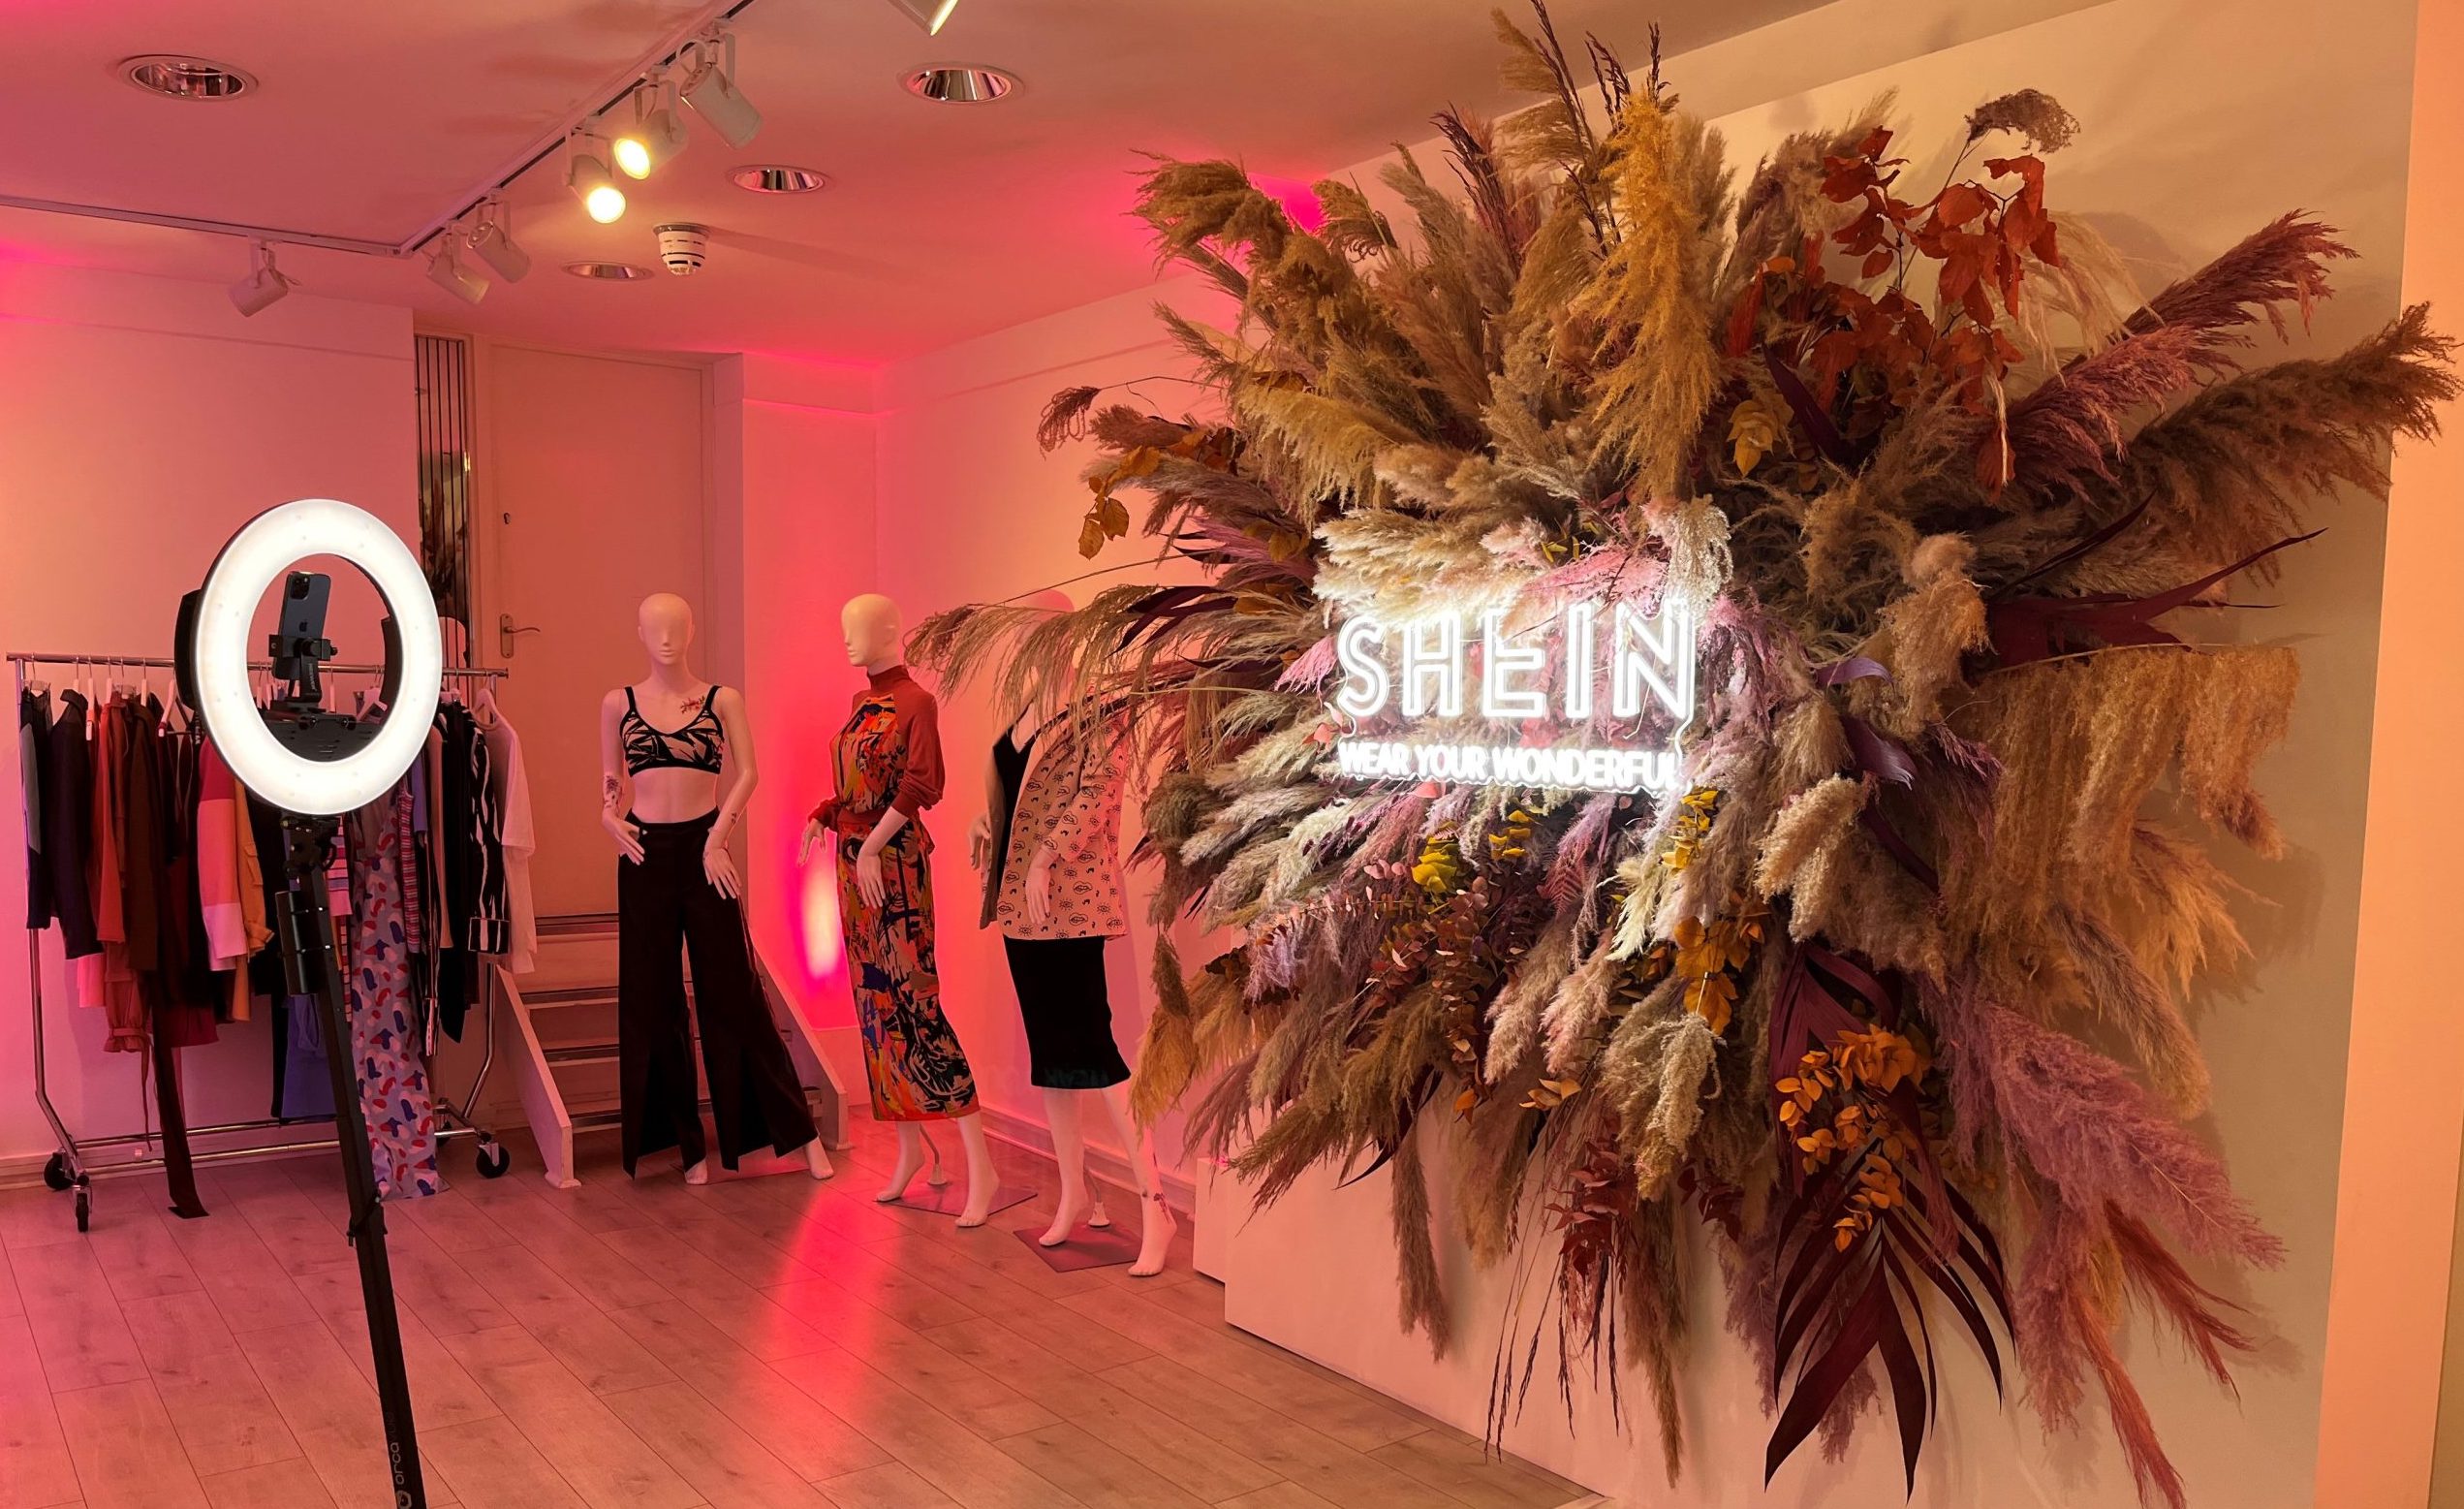 SHEIN's exploration evolves into the online marketplace